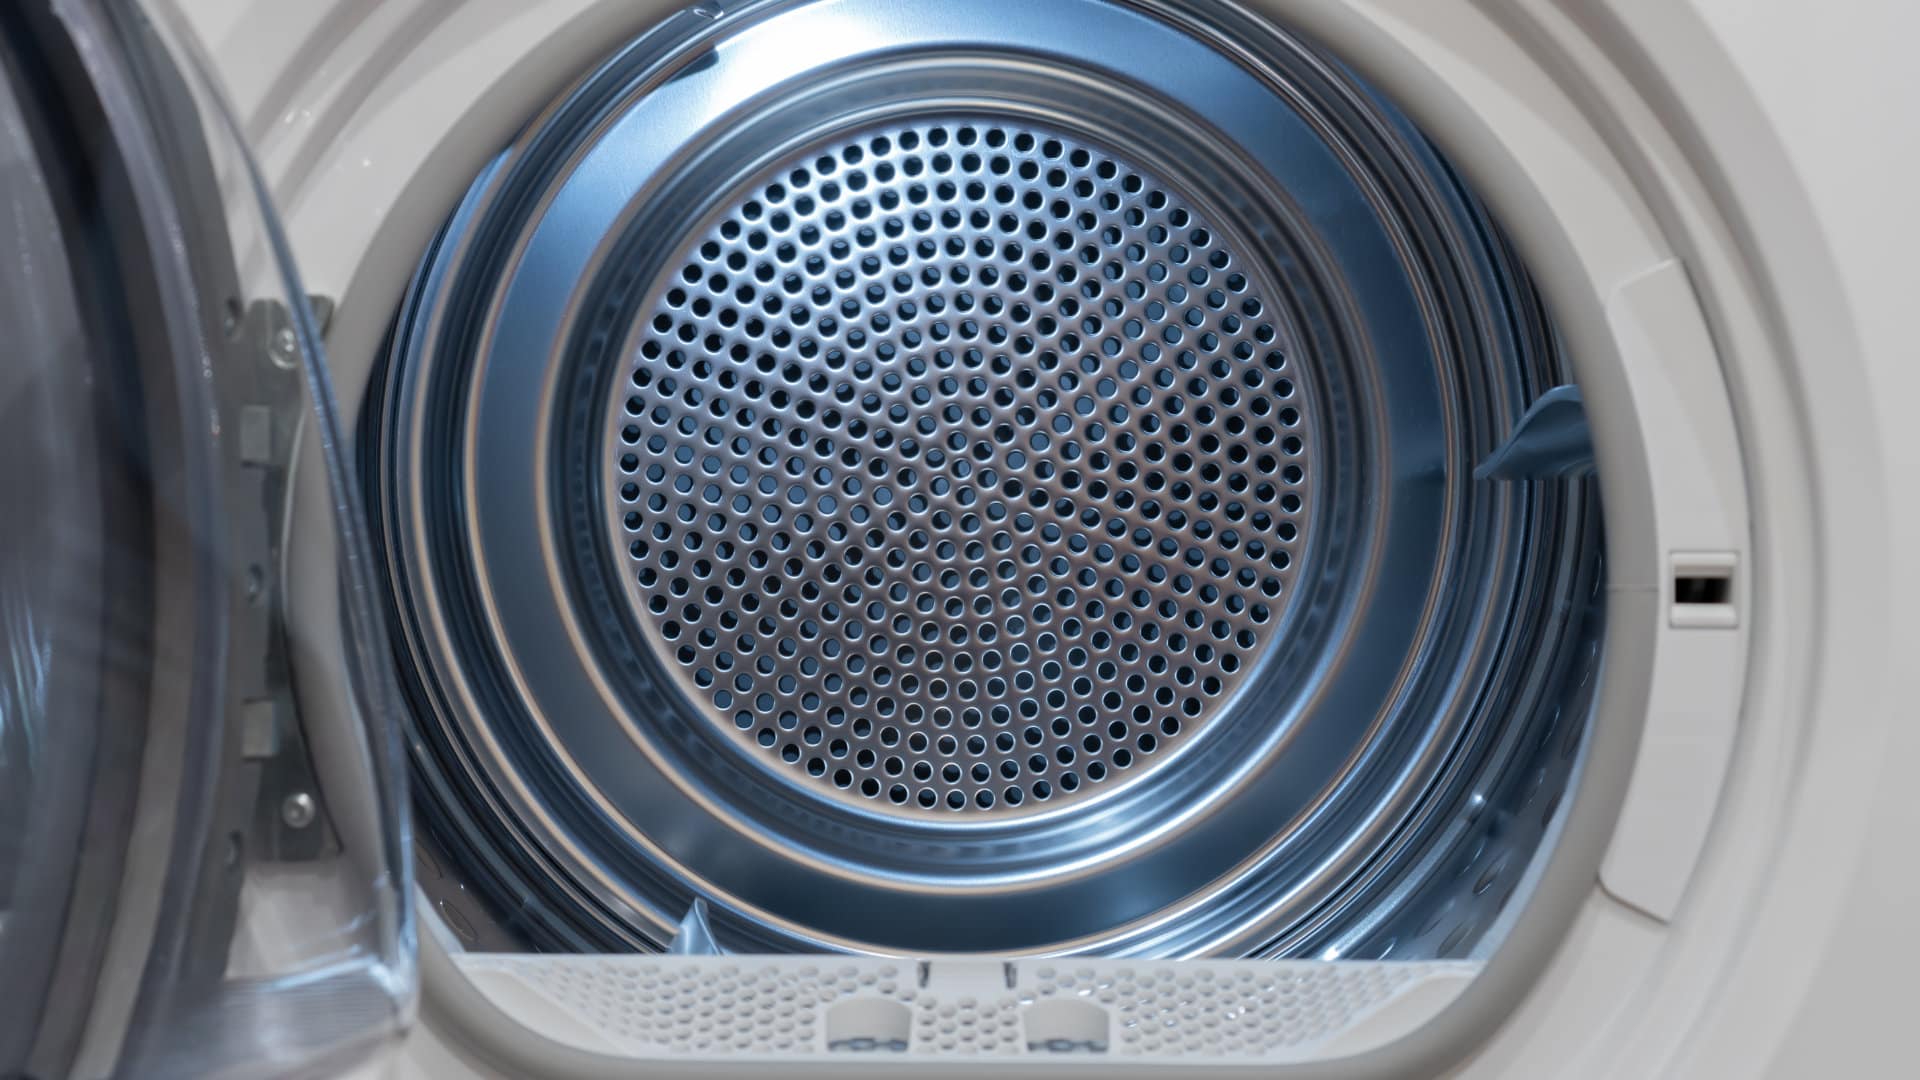 How To Fix The Error Code F70 For Whirlpool Washer